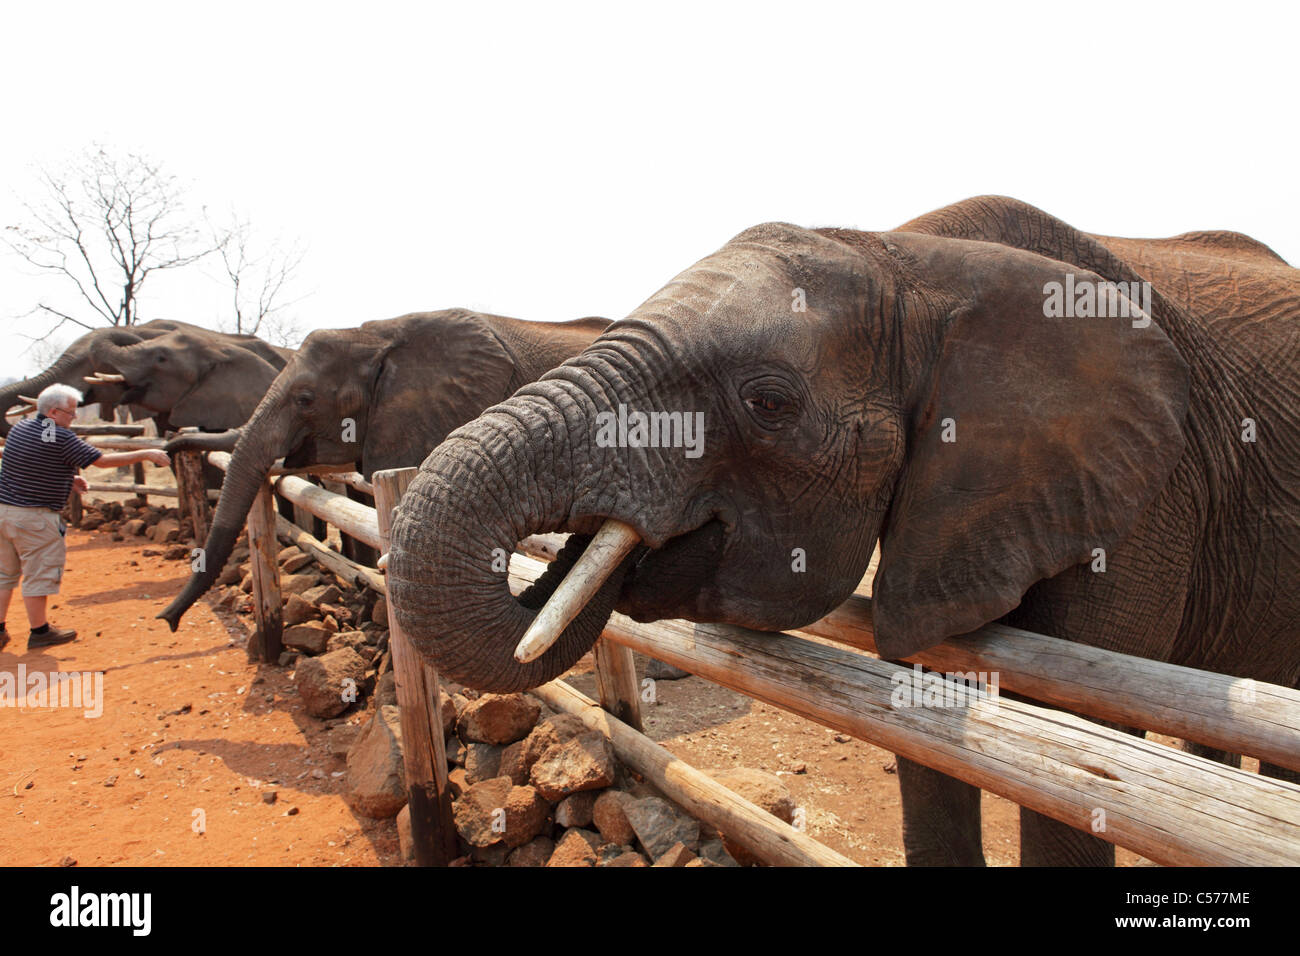 African elephants at the Wild Horizons Elephant Camp at Victoria Falls in Zimbabwe. Stock Photo